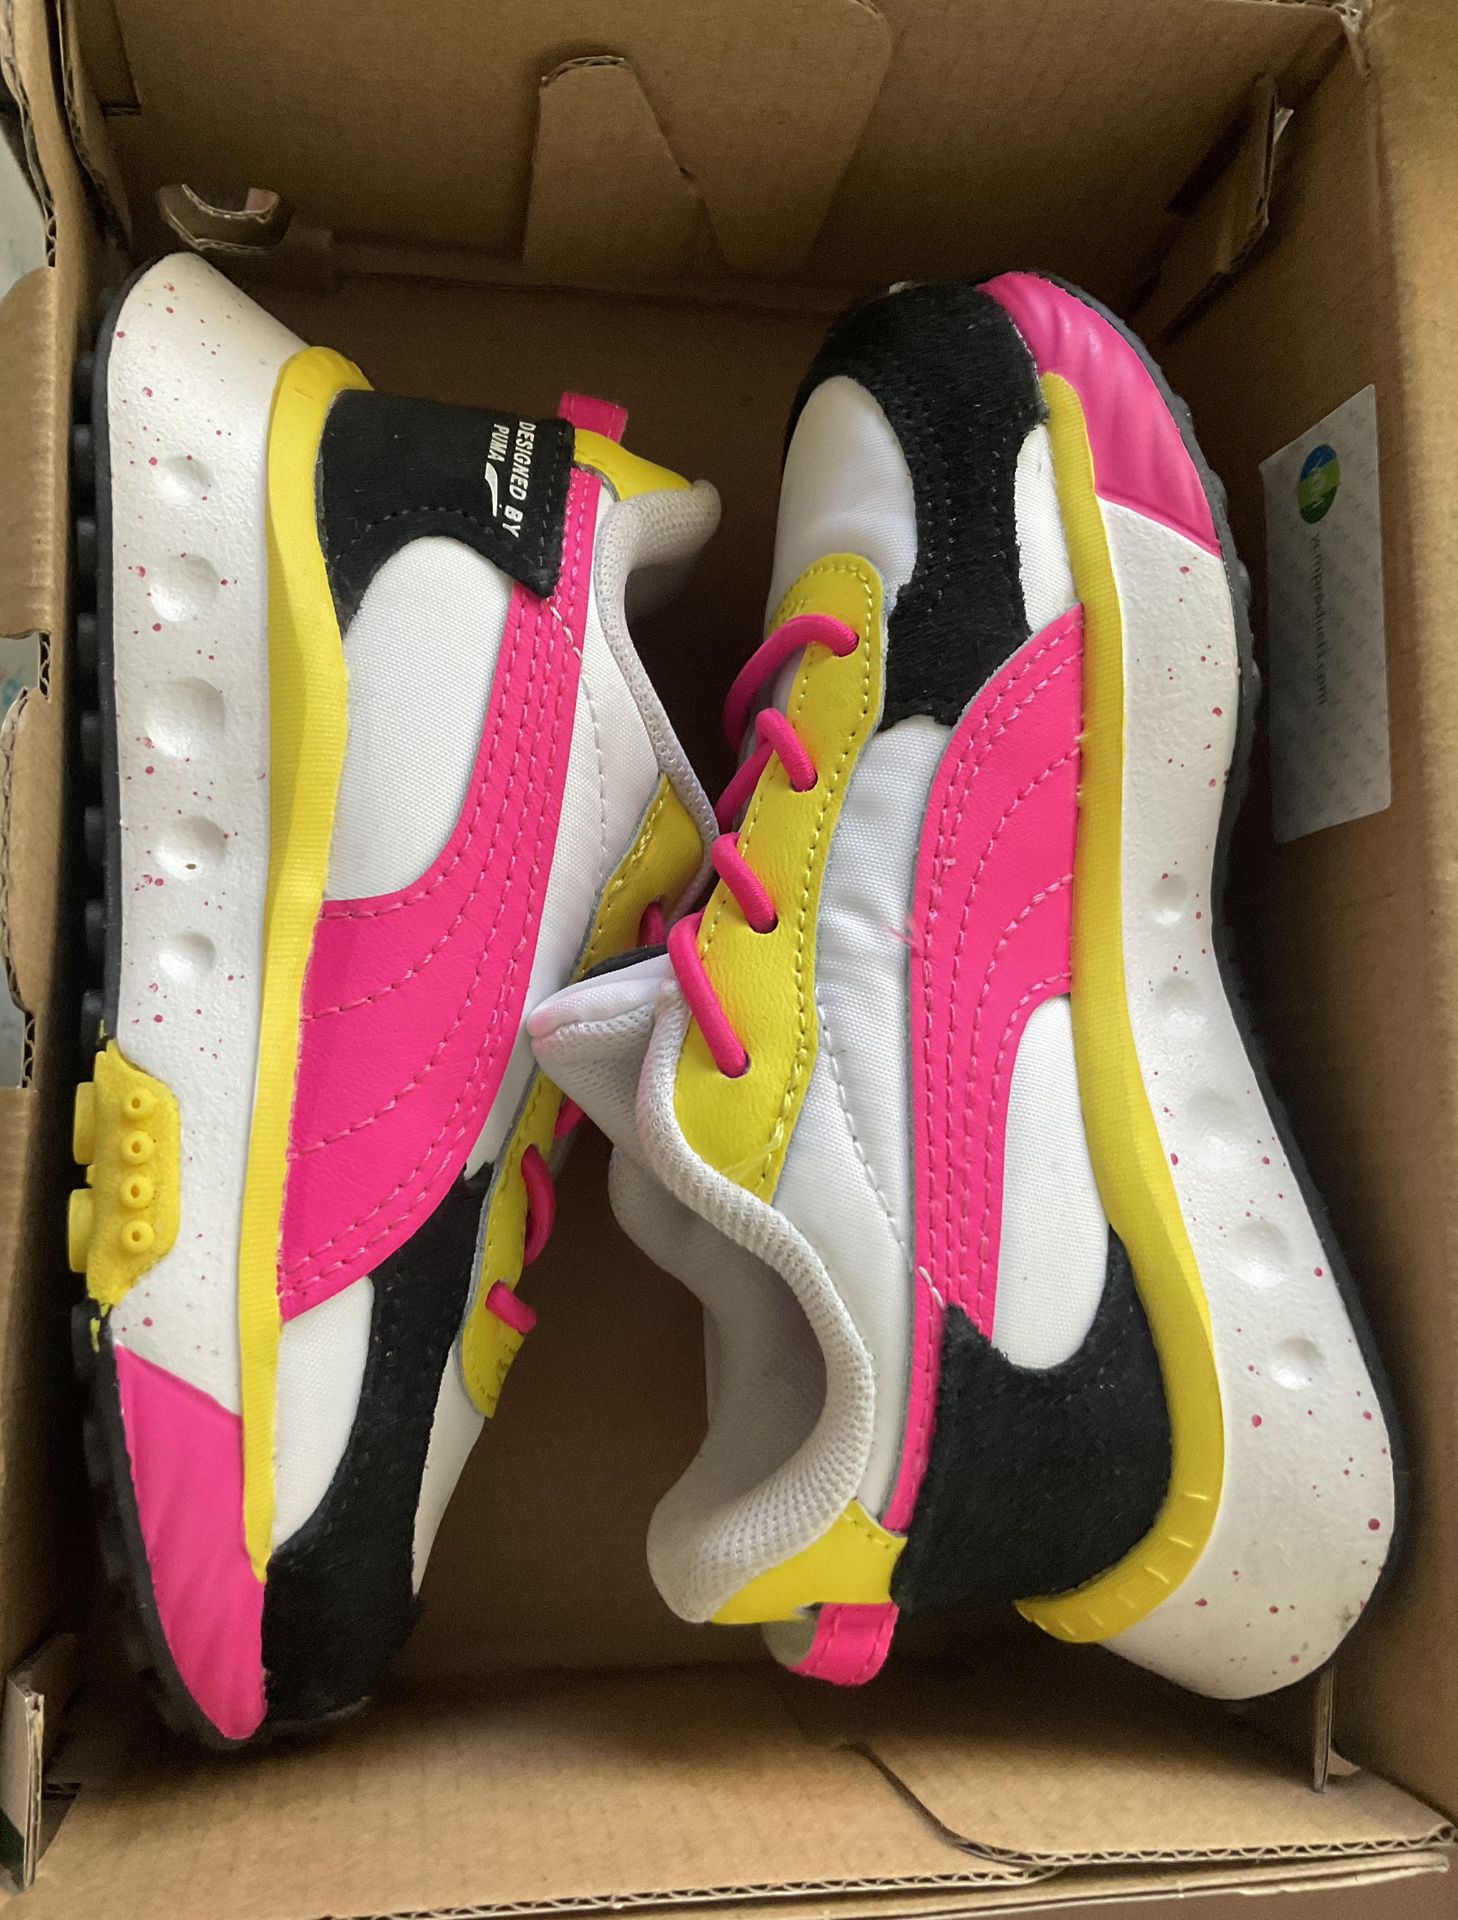 New Puma Tennis Shoes-size 7c Toddler Girls -$20 Firm,No Hold 